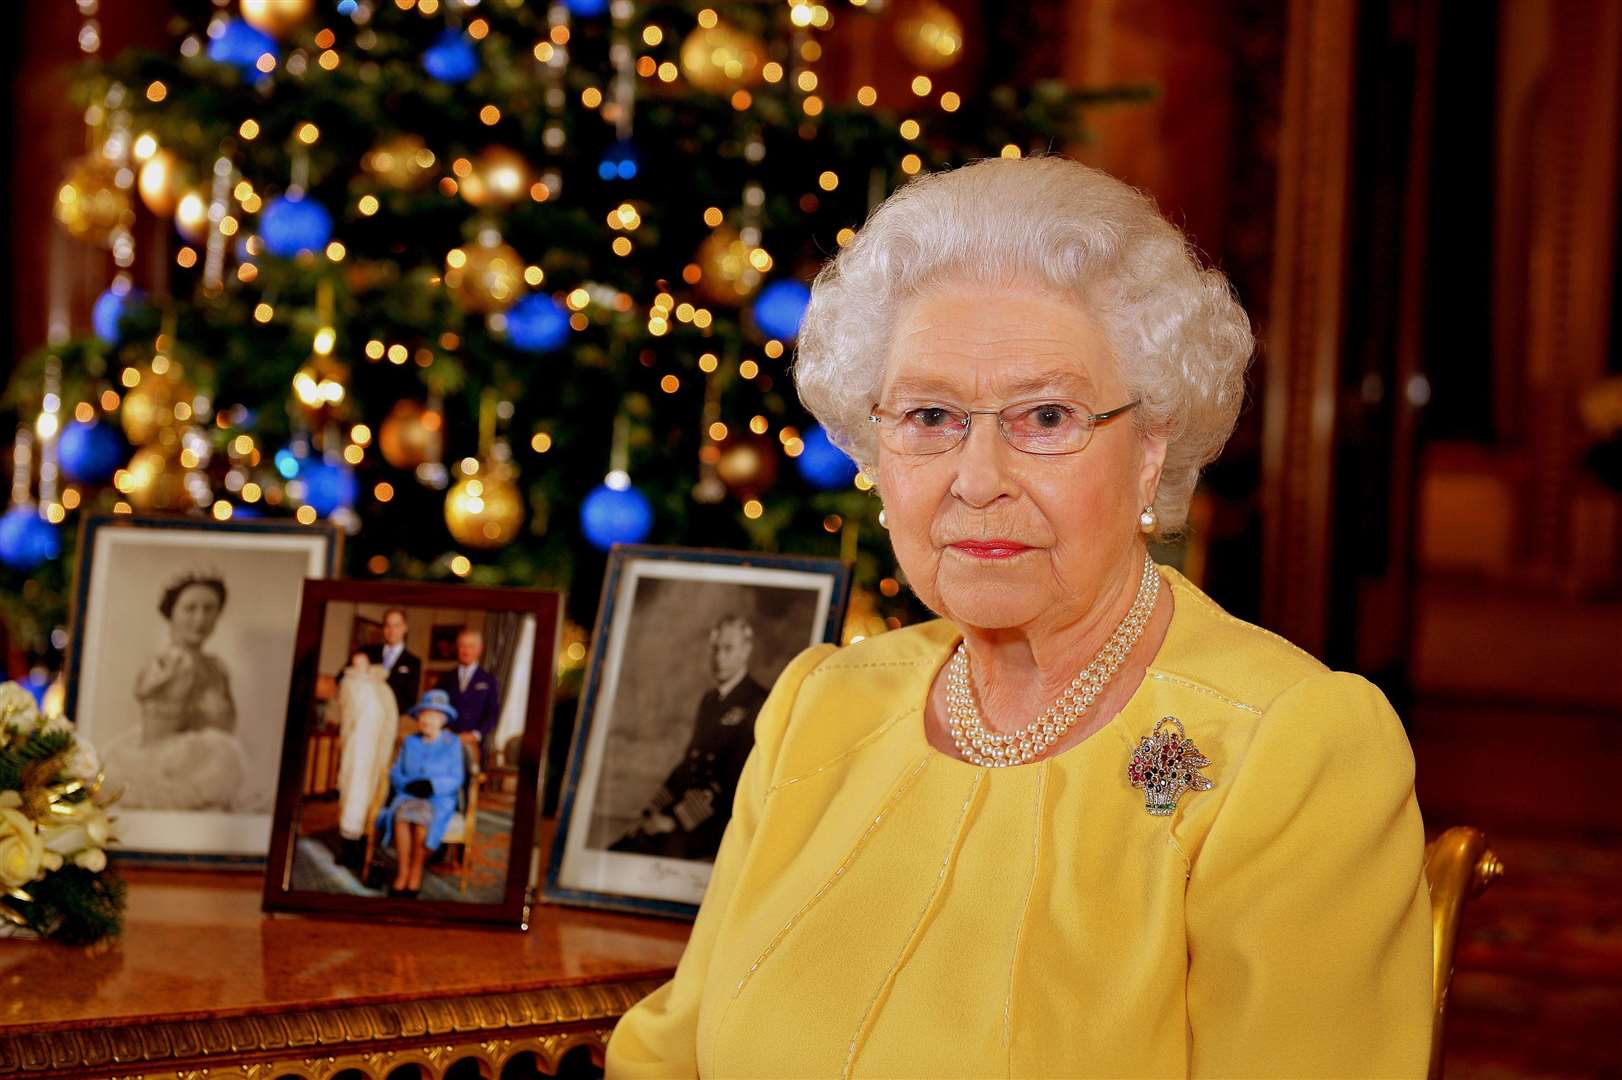 The Queen after recording her Christmas Day broadcast in the Blue Drawing Room at Buckingham Palace in 2013 (John Stillwell/PA)